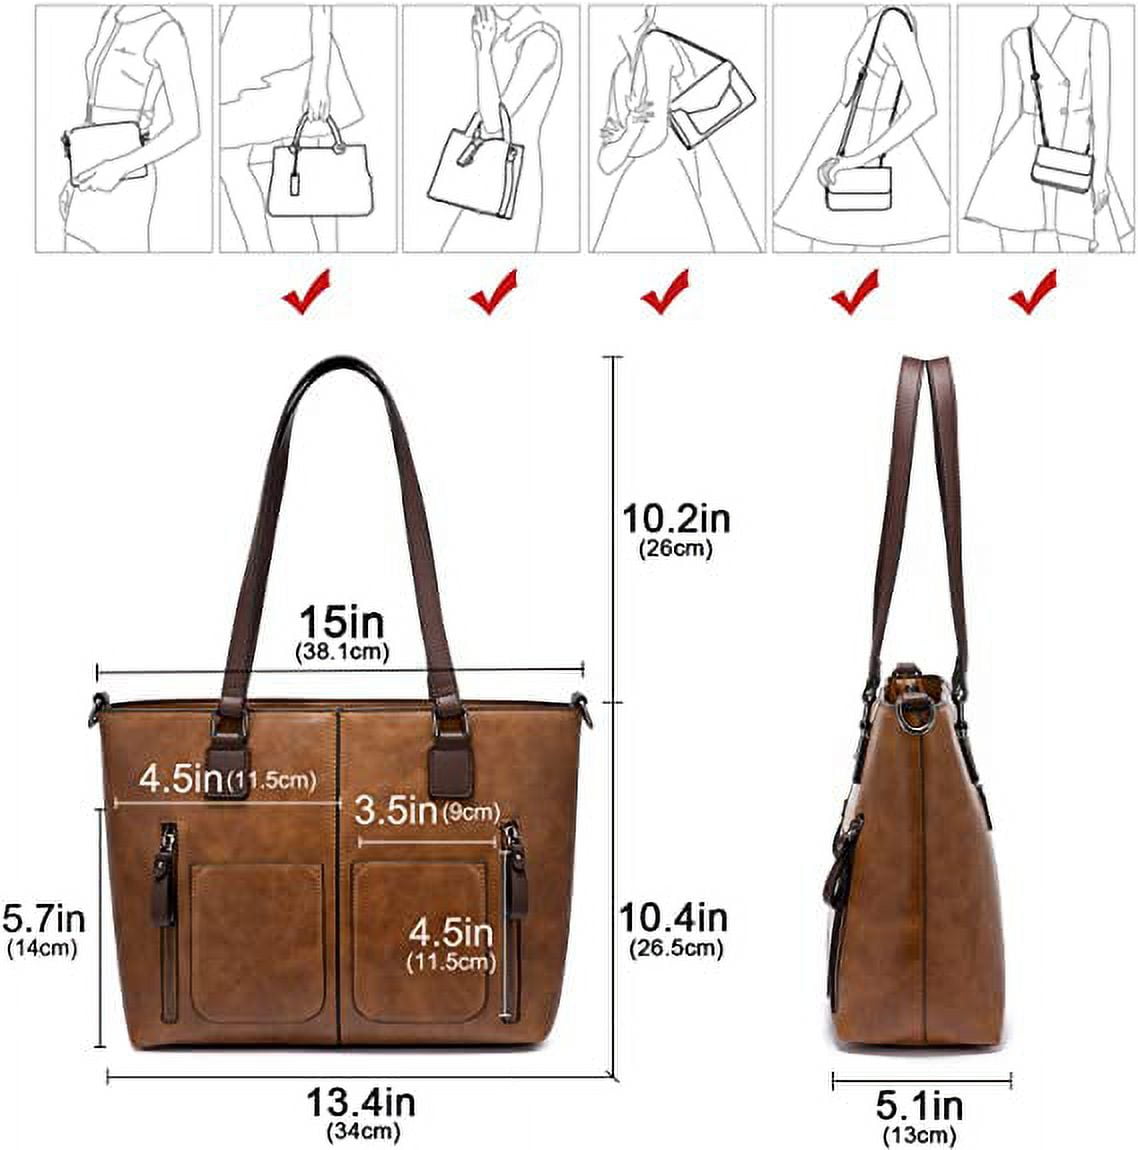  LOVEVOOK Women Leather Handbags Purses Designer Tote Shoulder Bag  Top Handle Bag for Daily Work Travel Beige : Clothing, Shoes & Jewelry